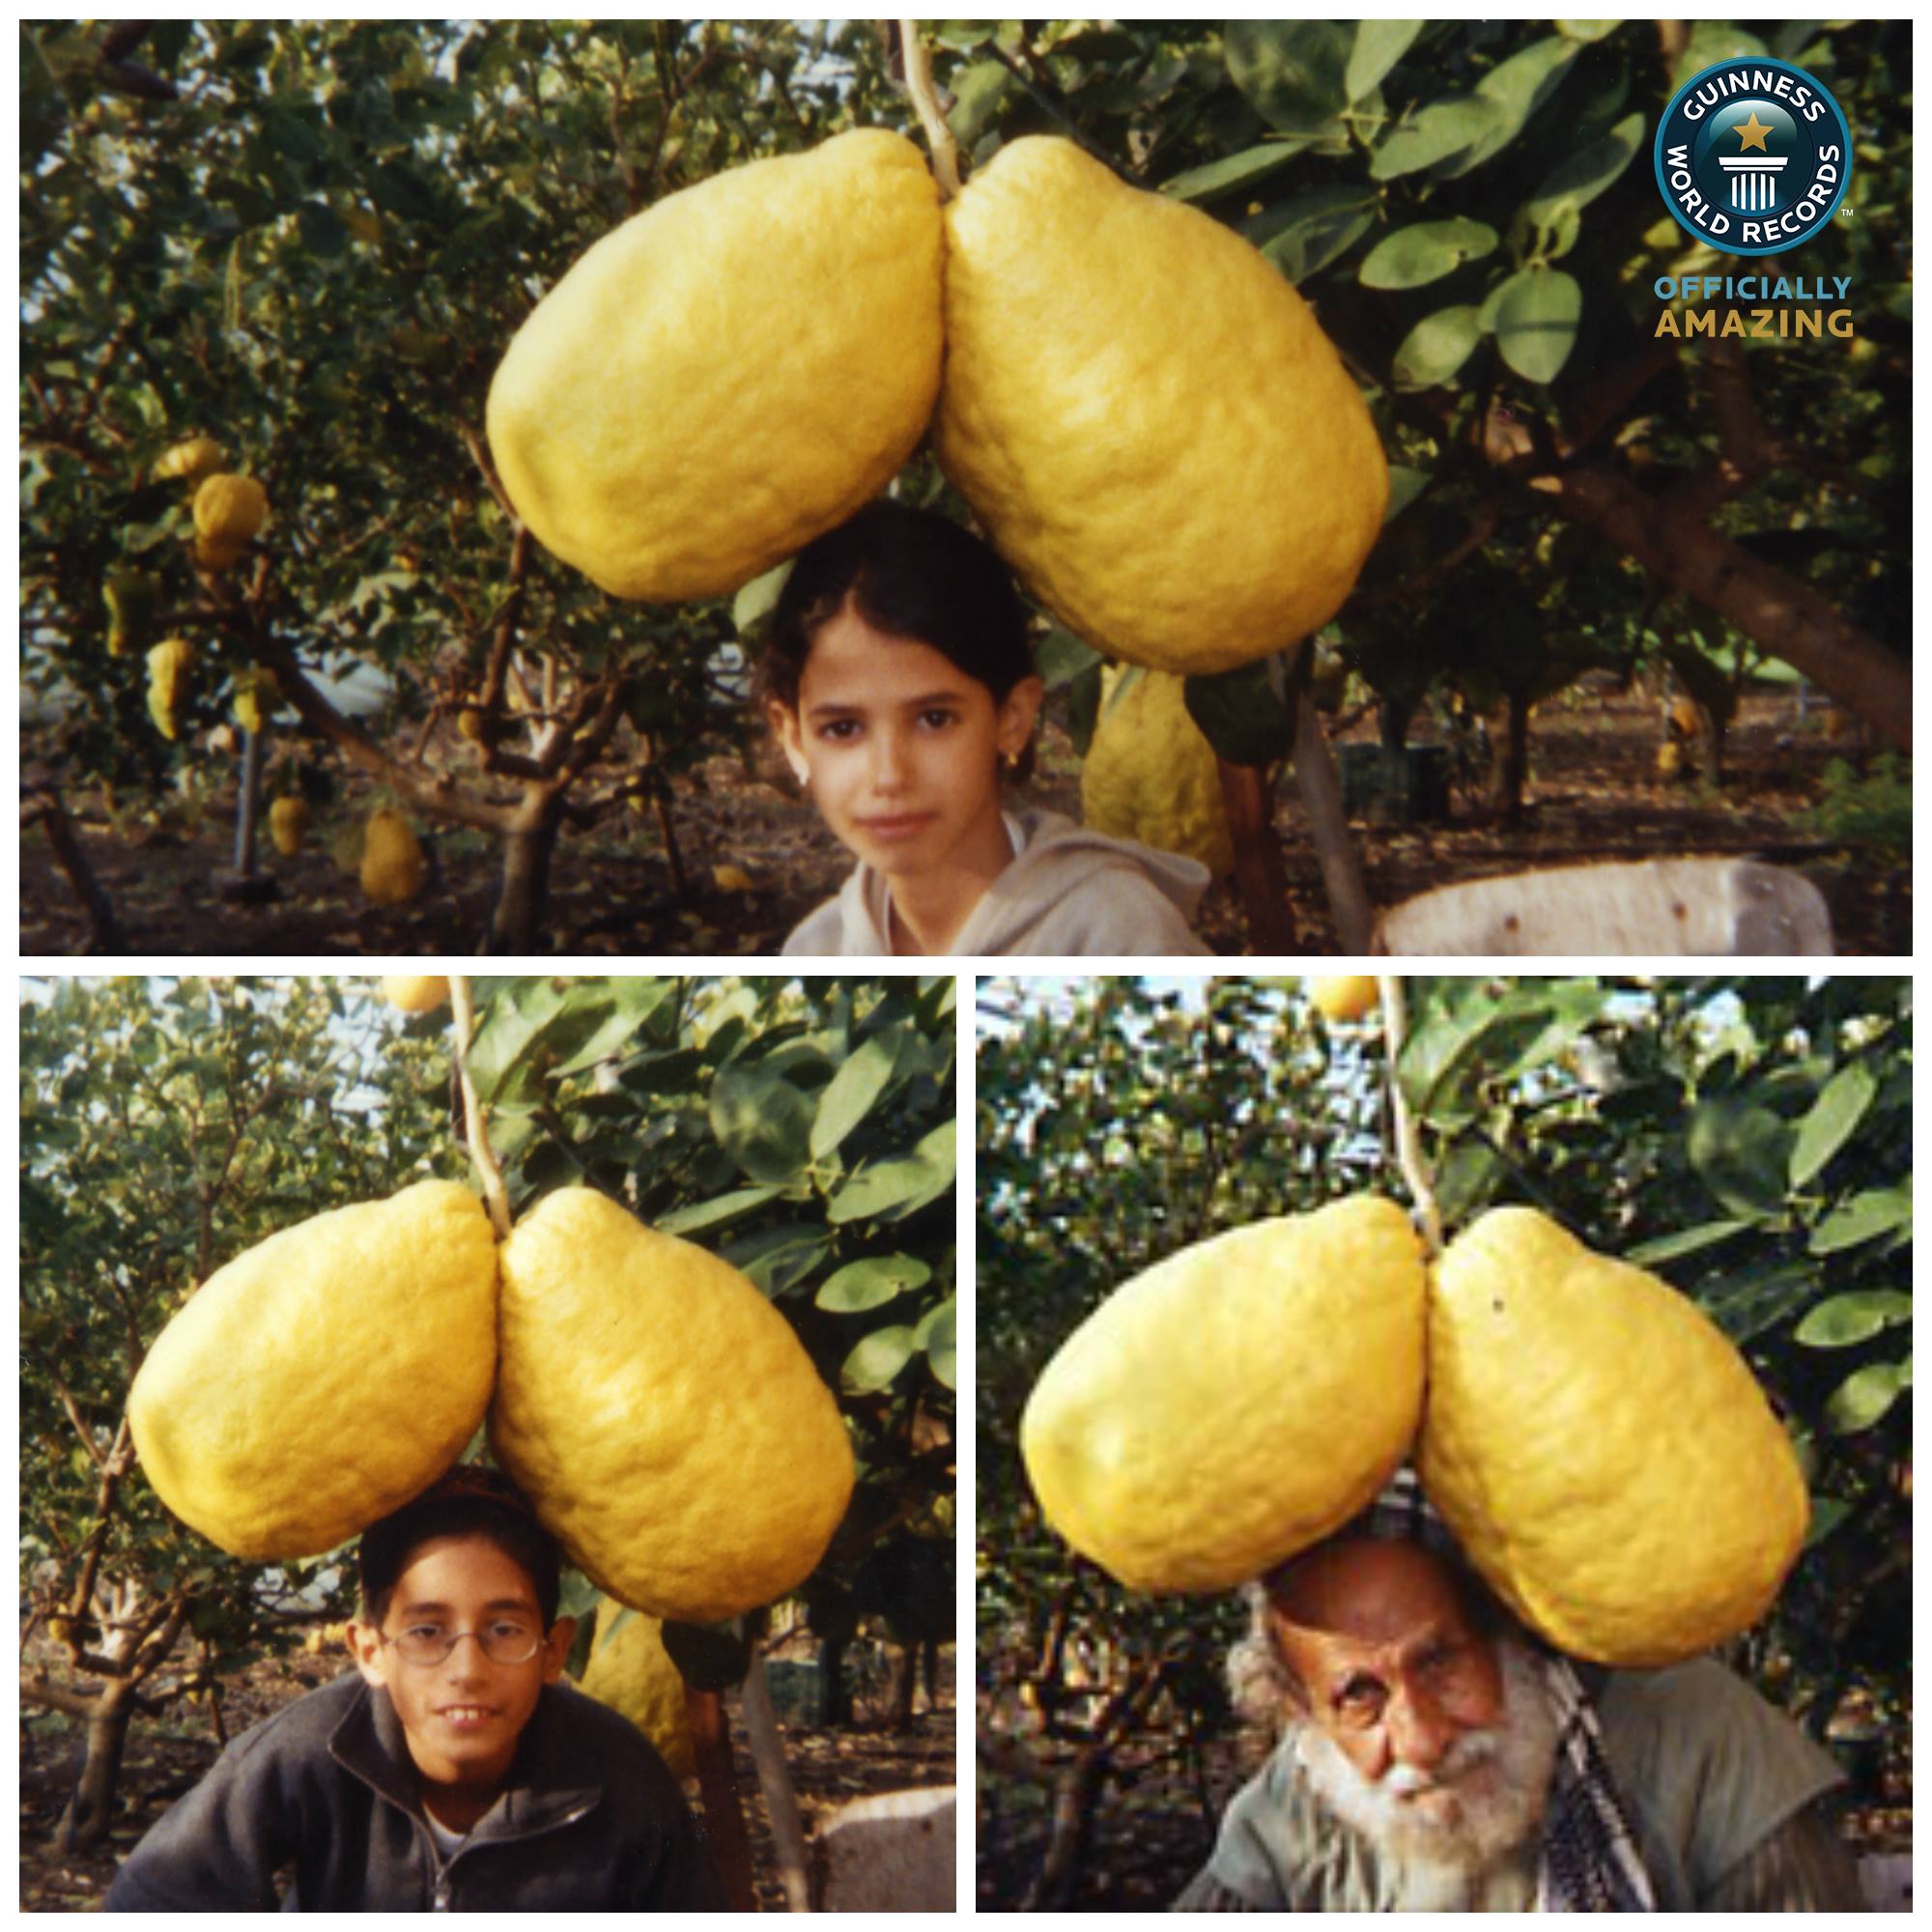 The world's heaviest lemon grown by Aharon Shemoel in 2003. | Source: facebook.com/Guinness World Records